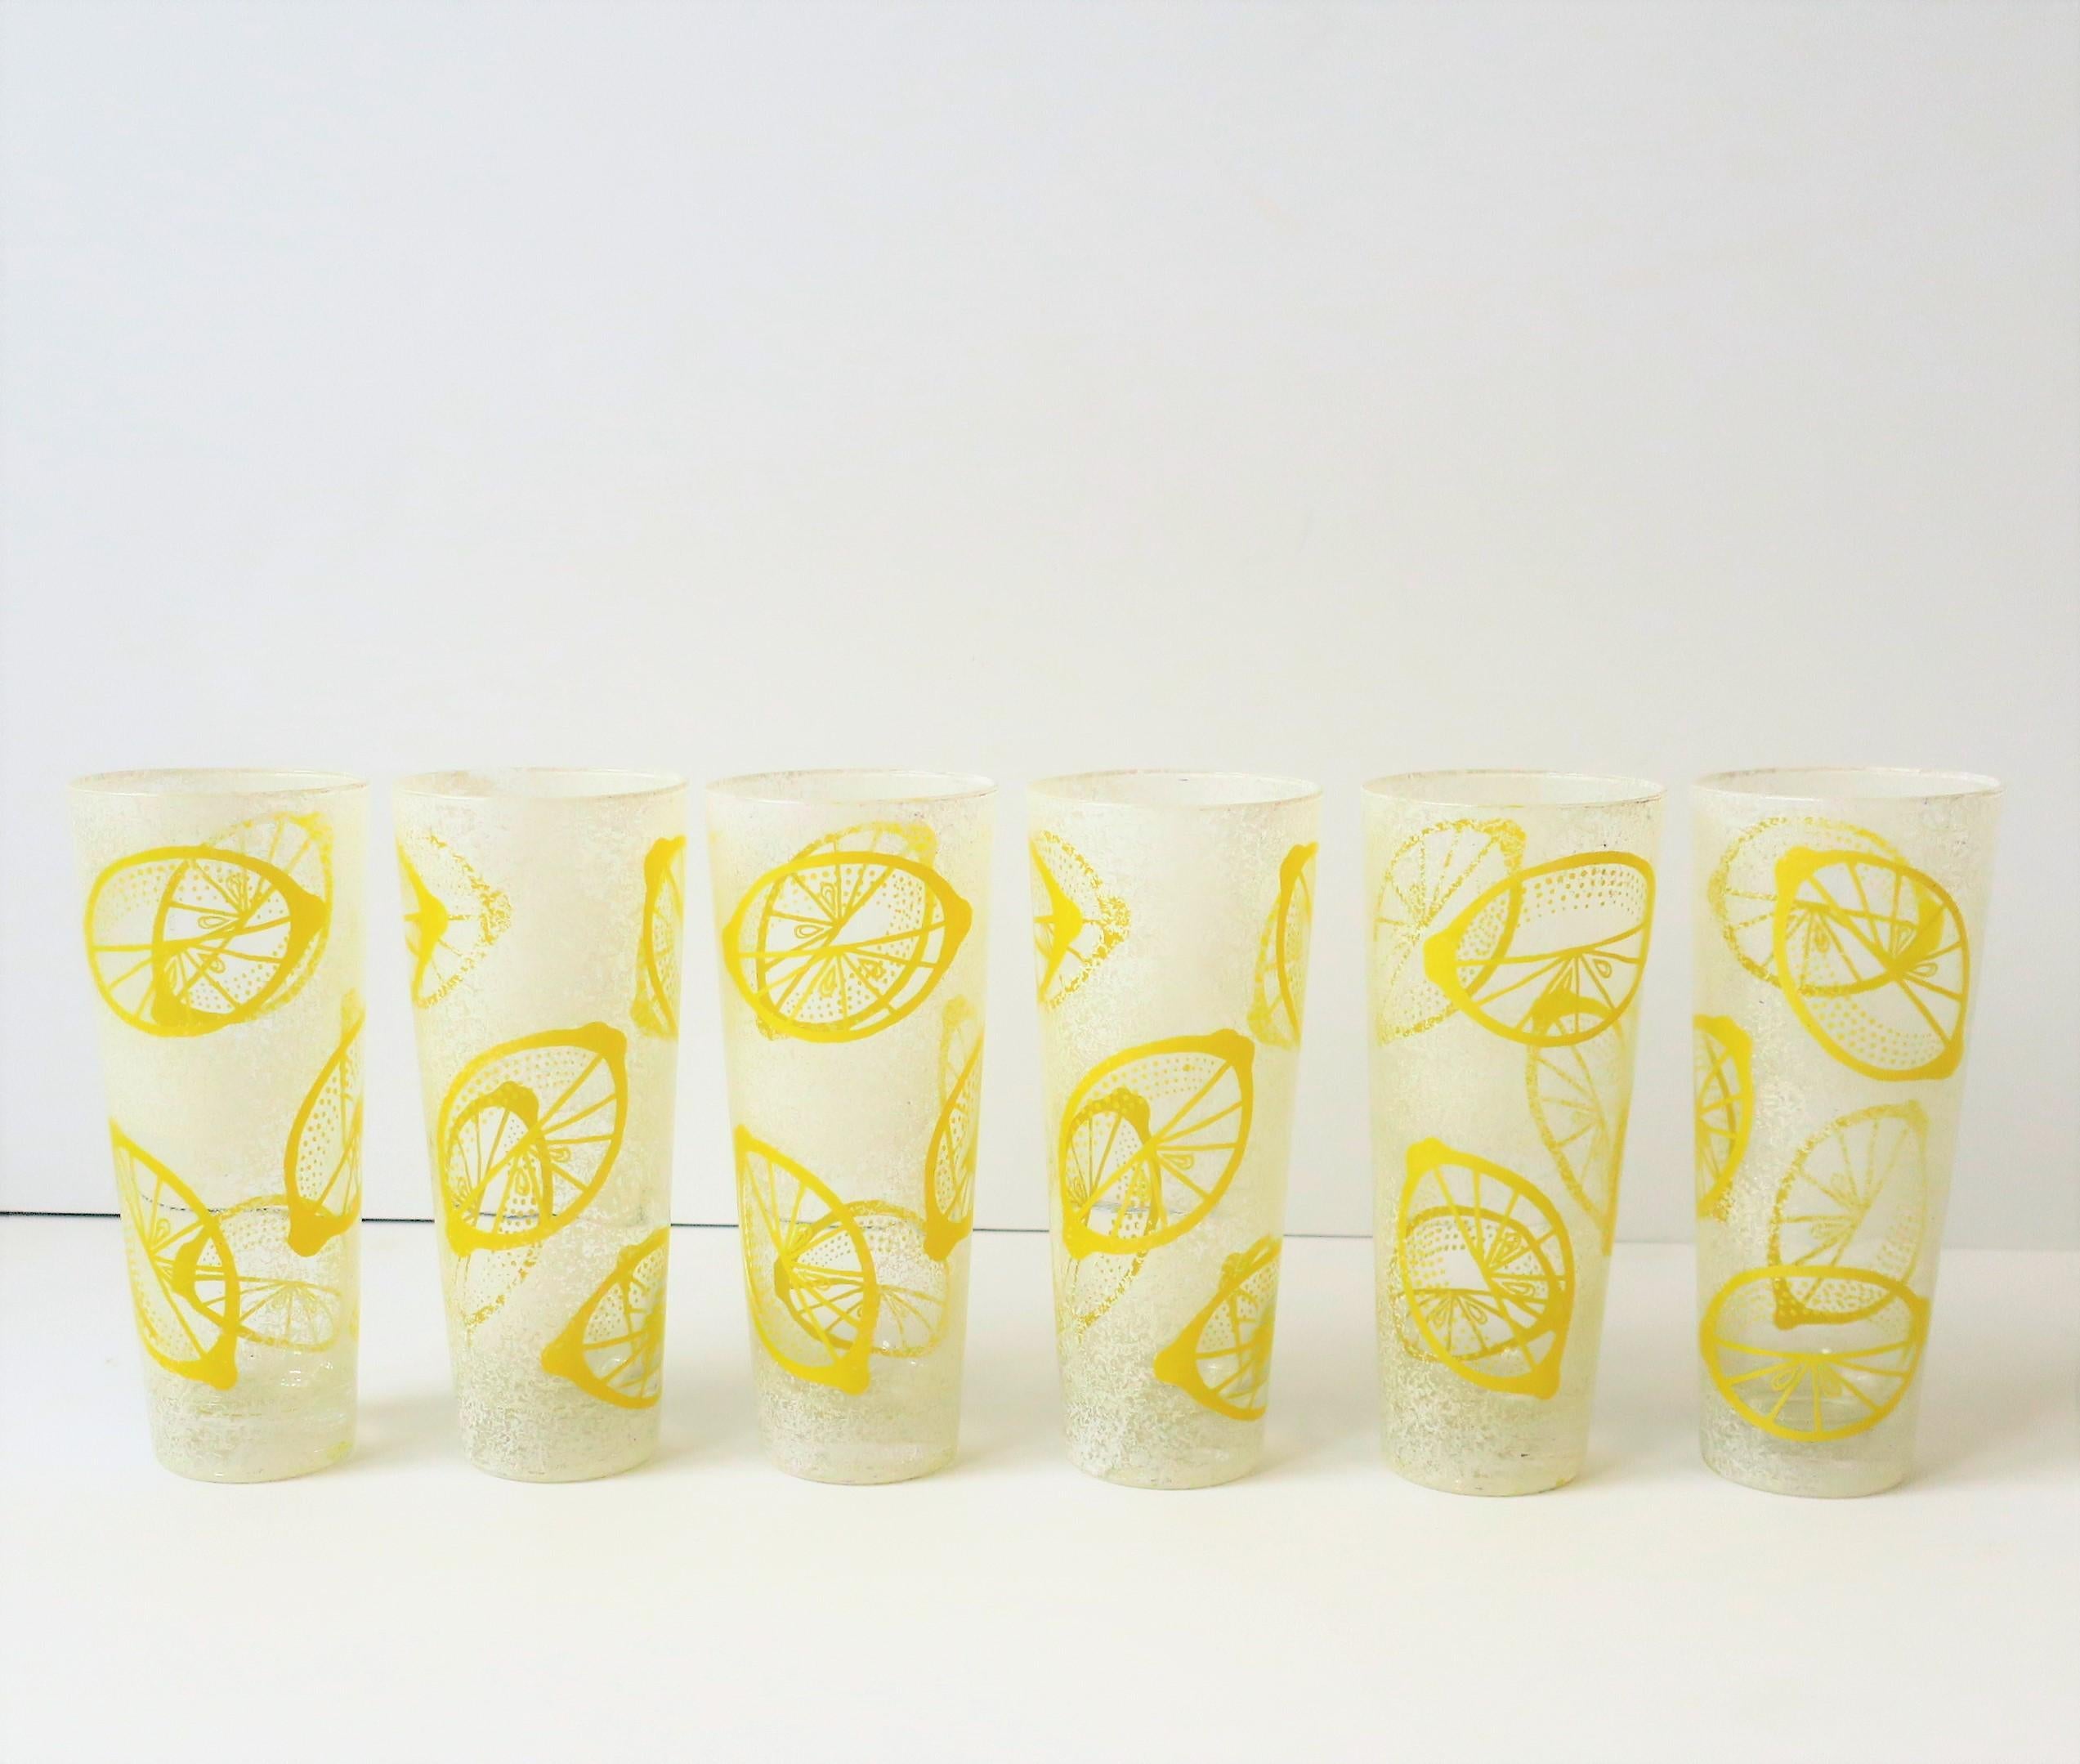 A beautiful set of 6 vintage yellow and white highball cocktail rocks' glasses with 'lemon' wedge design, circa Mid-20th century. This beautiful set has a slightly raised/textured design. Great for cocktails, lemonade, etc., for summer, yachting,